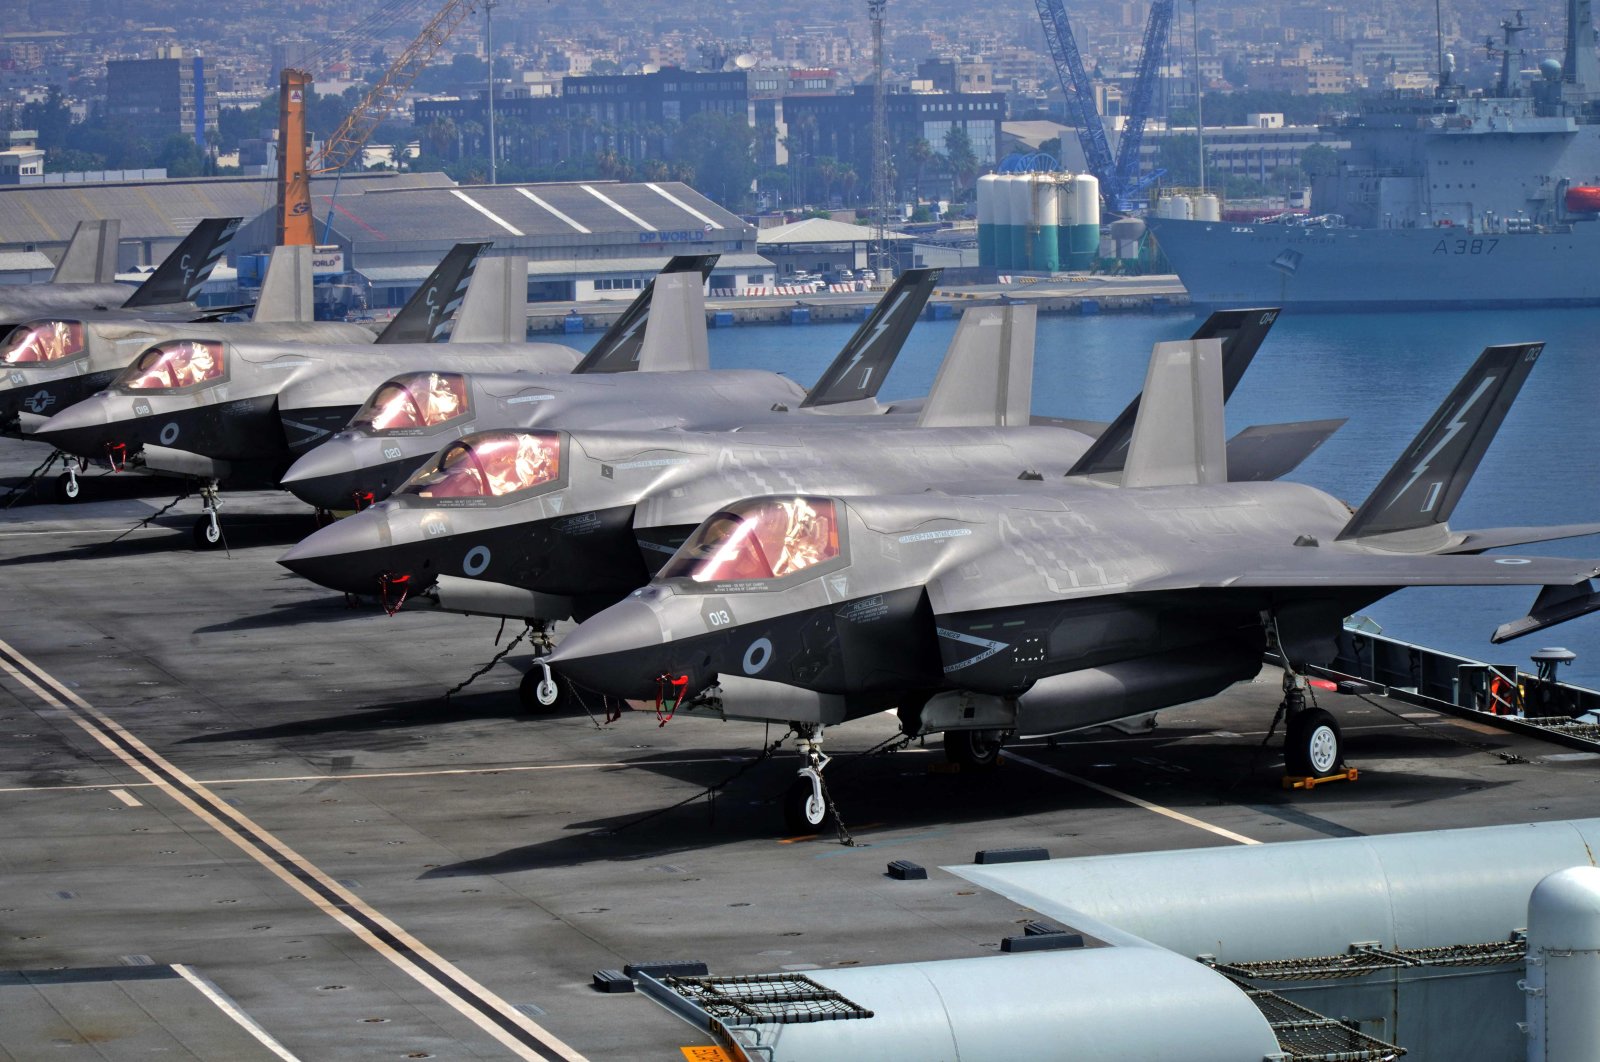 A view of Royal Navy F-35B Lightning multirole combat aircraft parked aboard the deck of the Royal Navy&#039;s HMS Queen Elizabeth aircraft carrier while moored in the new port of Greek Cypriot administration’s southern Limassol province, Cyprus, July 1, 2021. (AFP Photo)